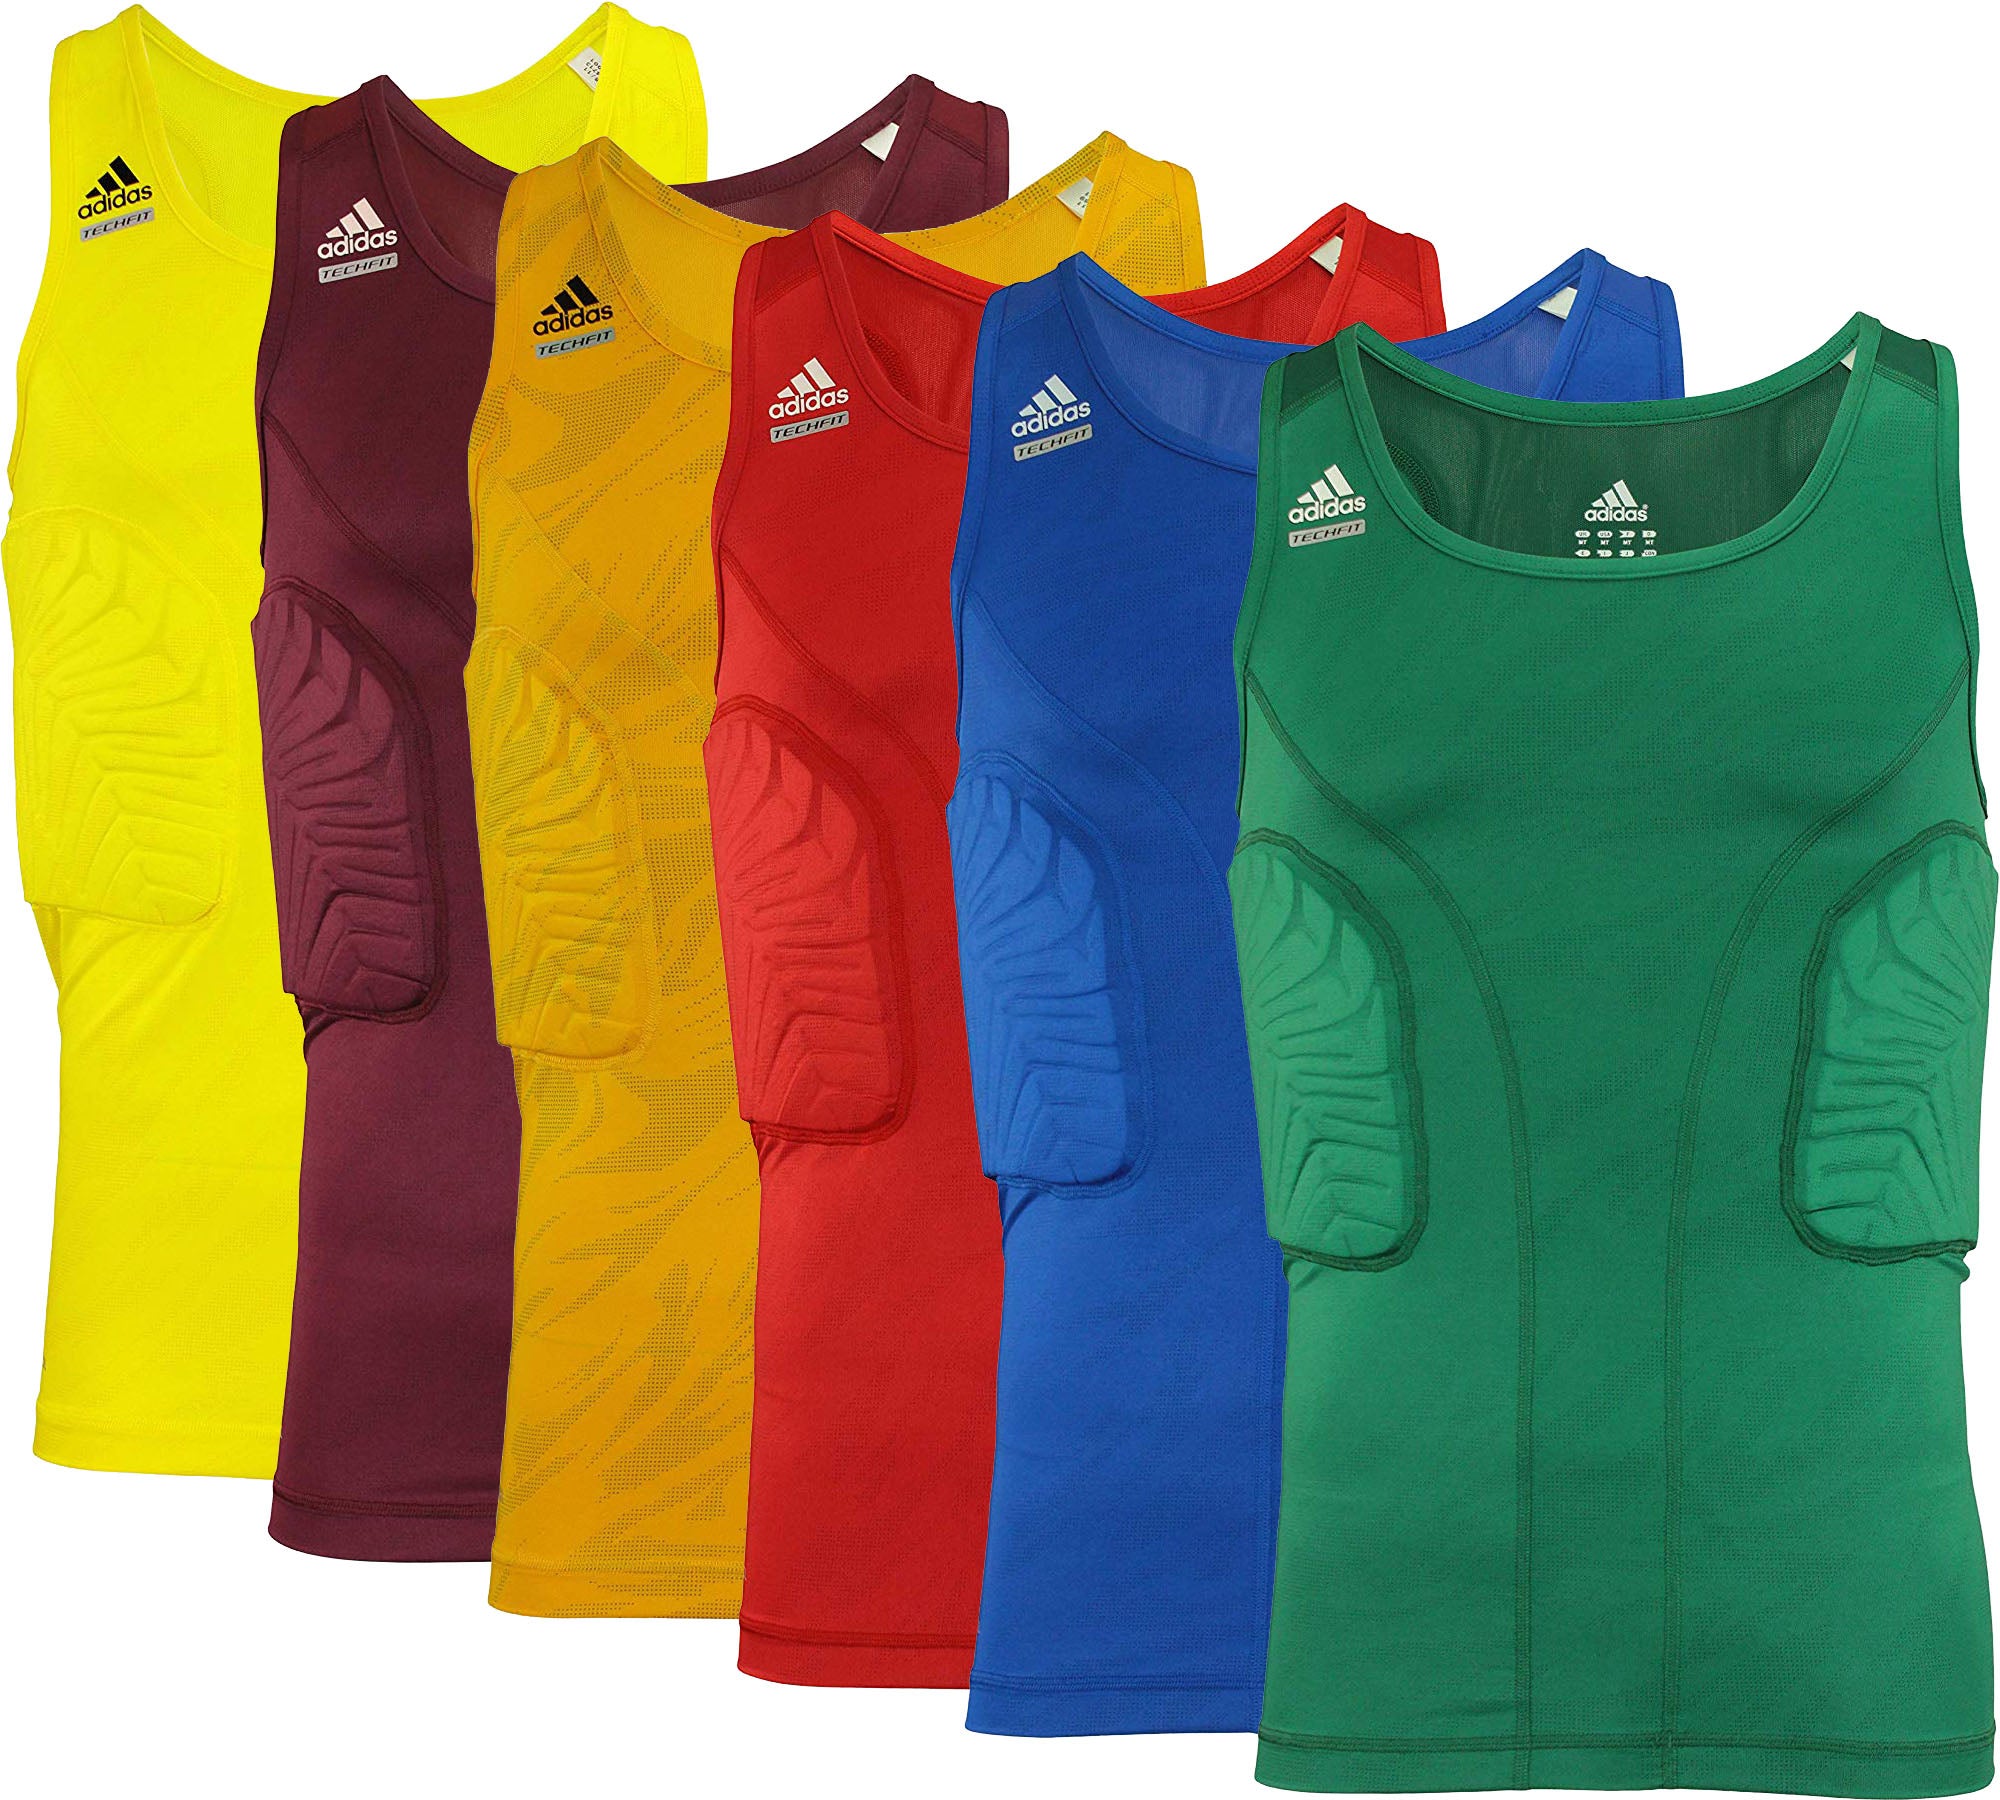 NBA Basketball Adidas Clima Cool Tech Fit Padded Compression Tank Top White  Med